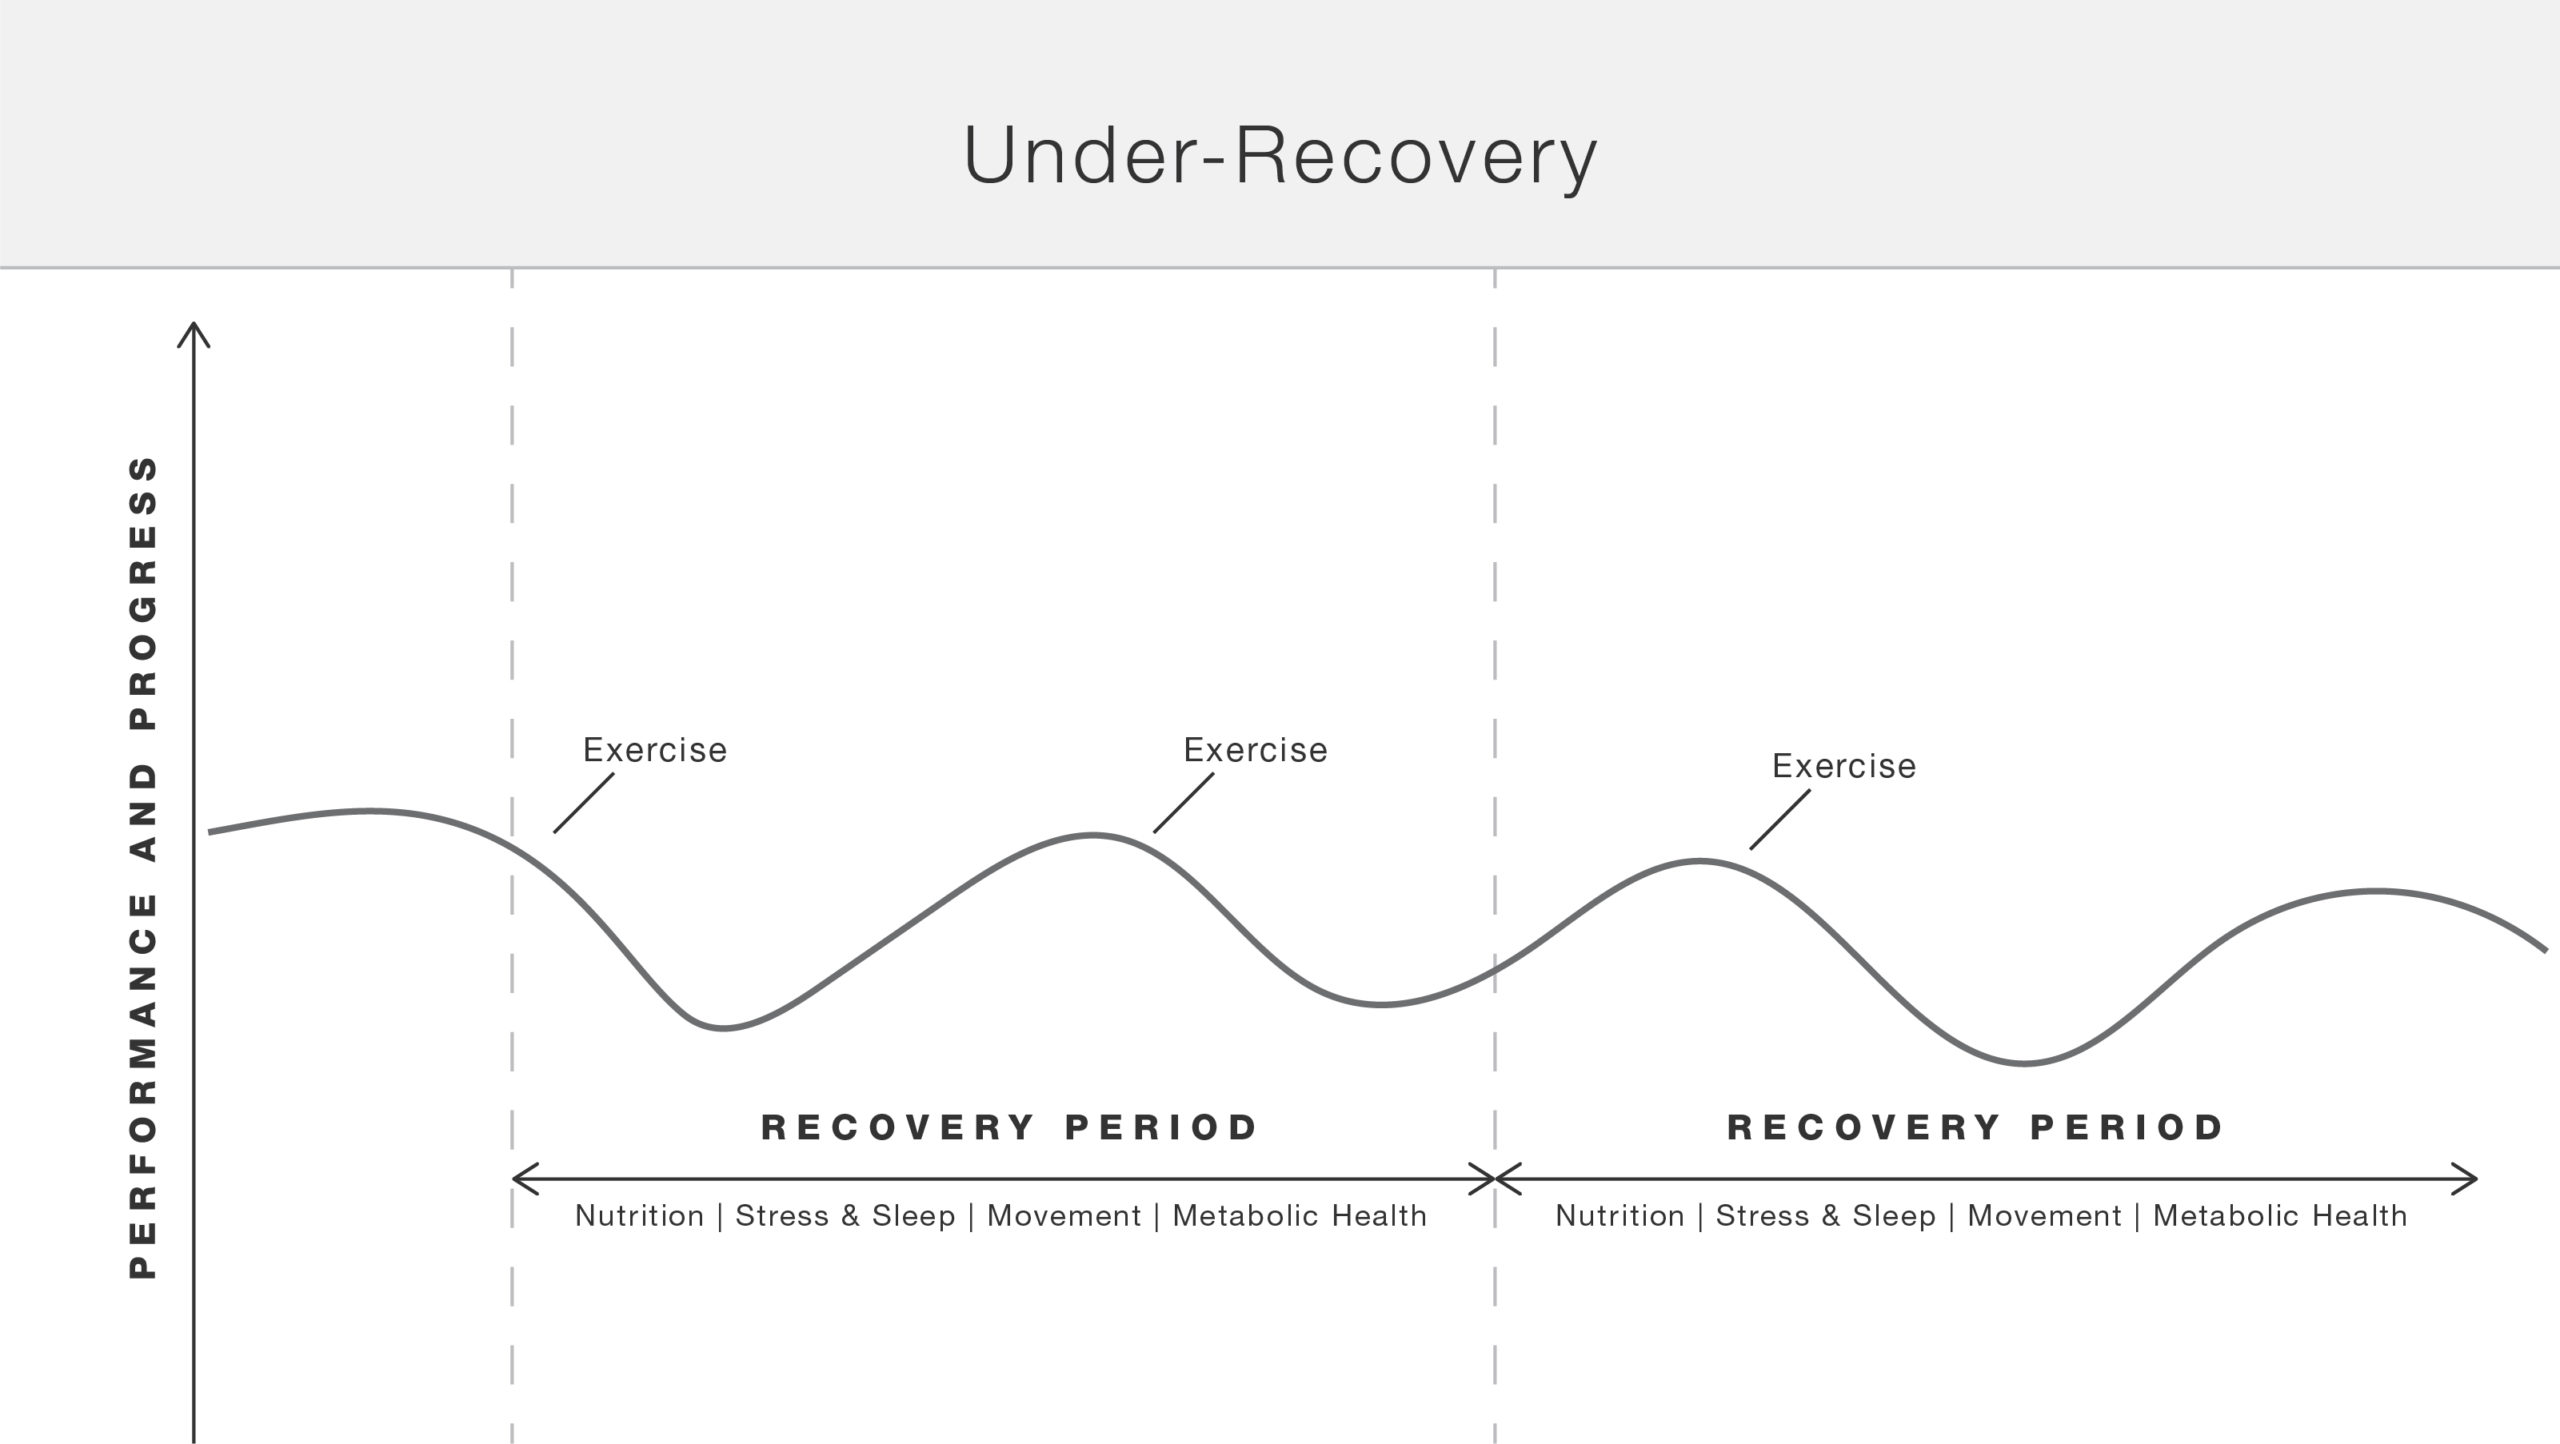 Graph showing performance and progress ebbs and flows with recovery periods and exercise.